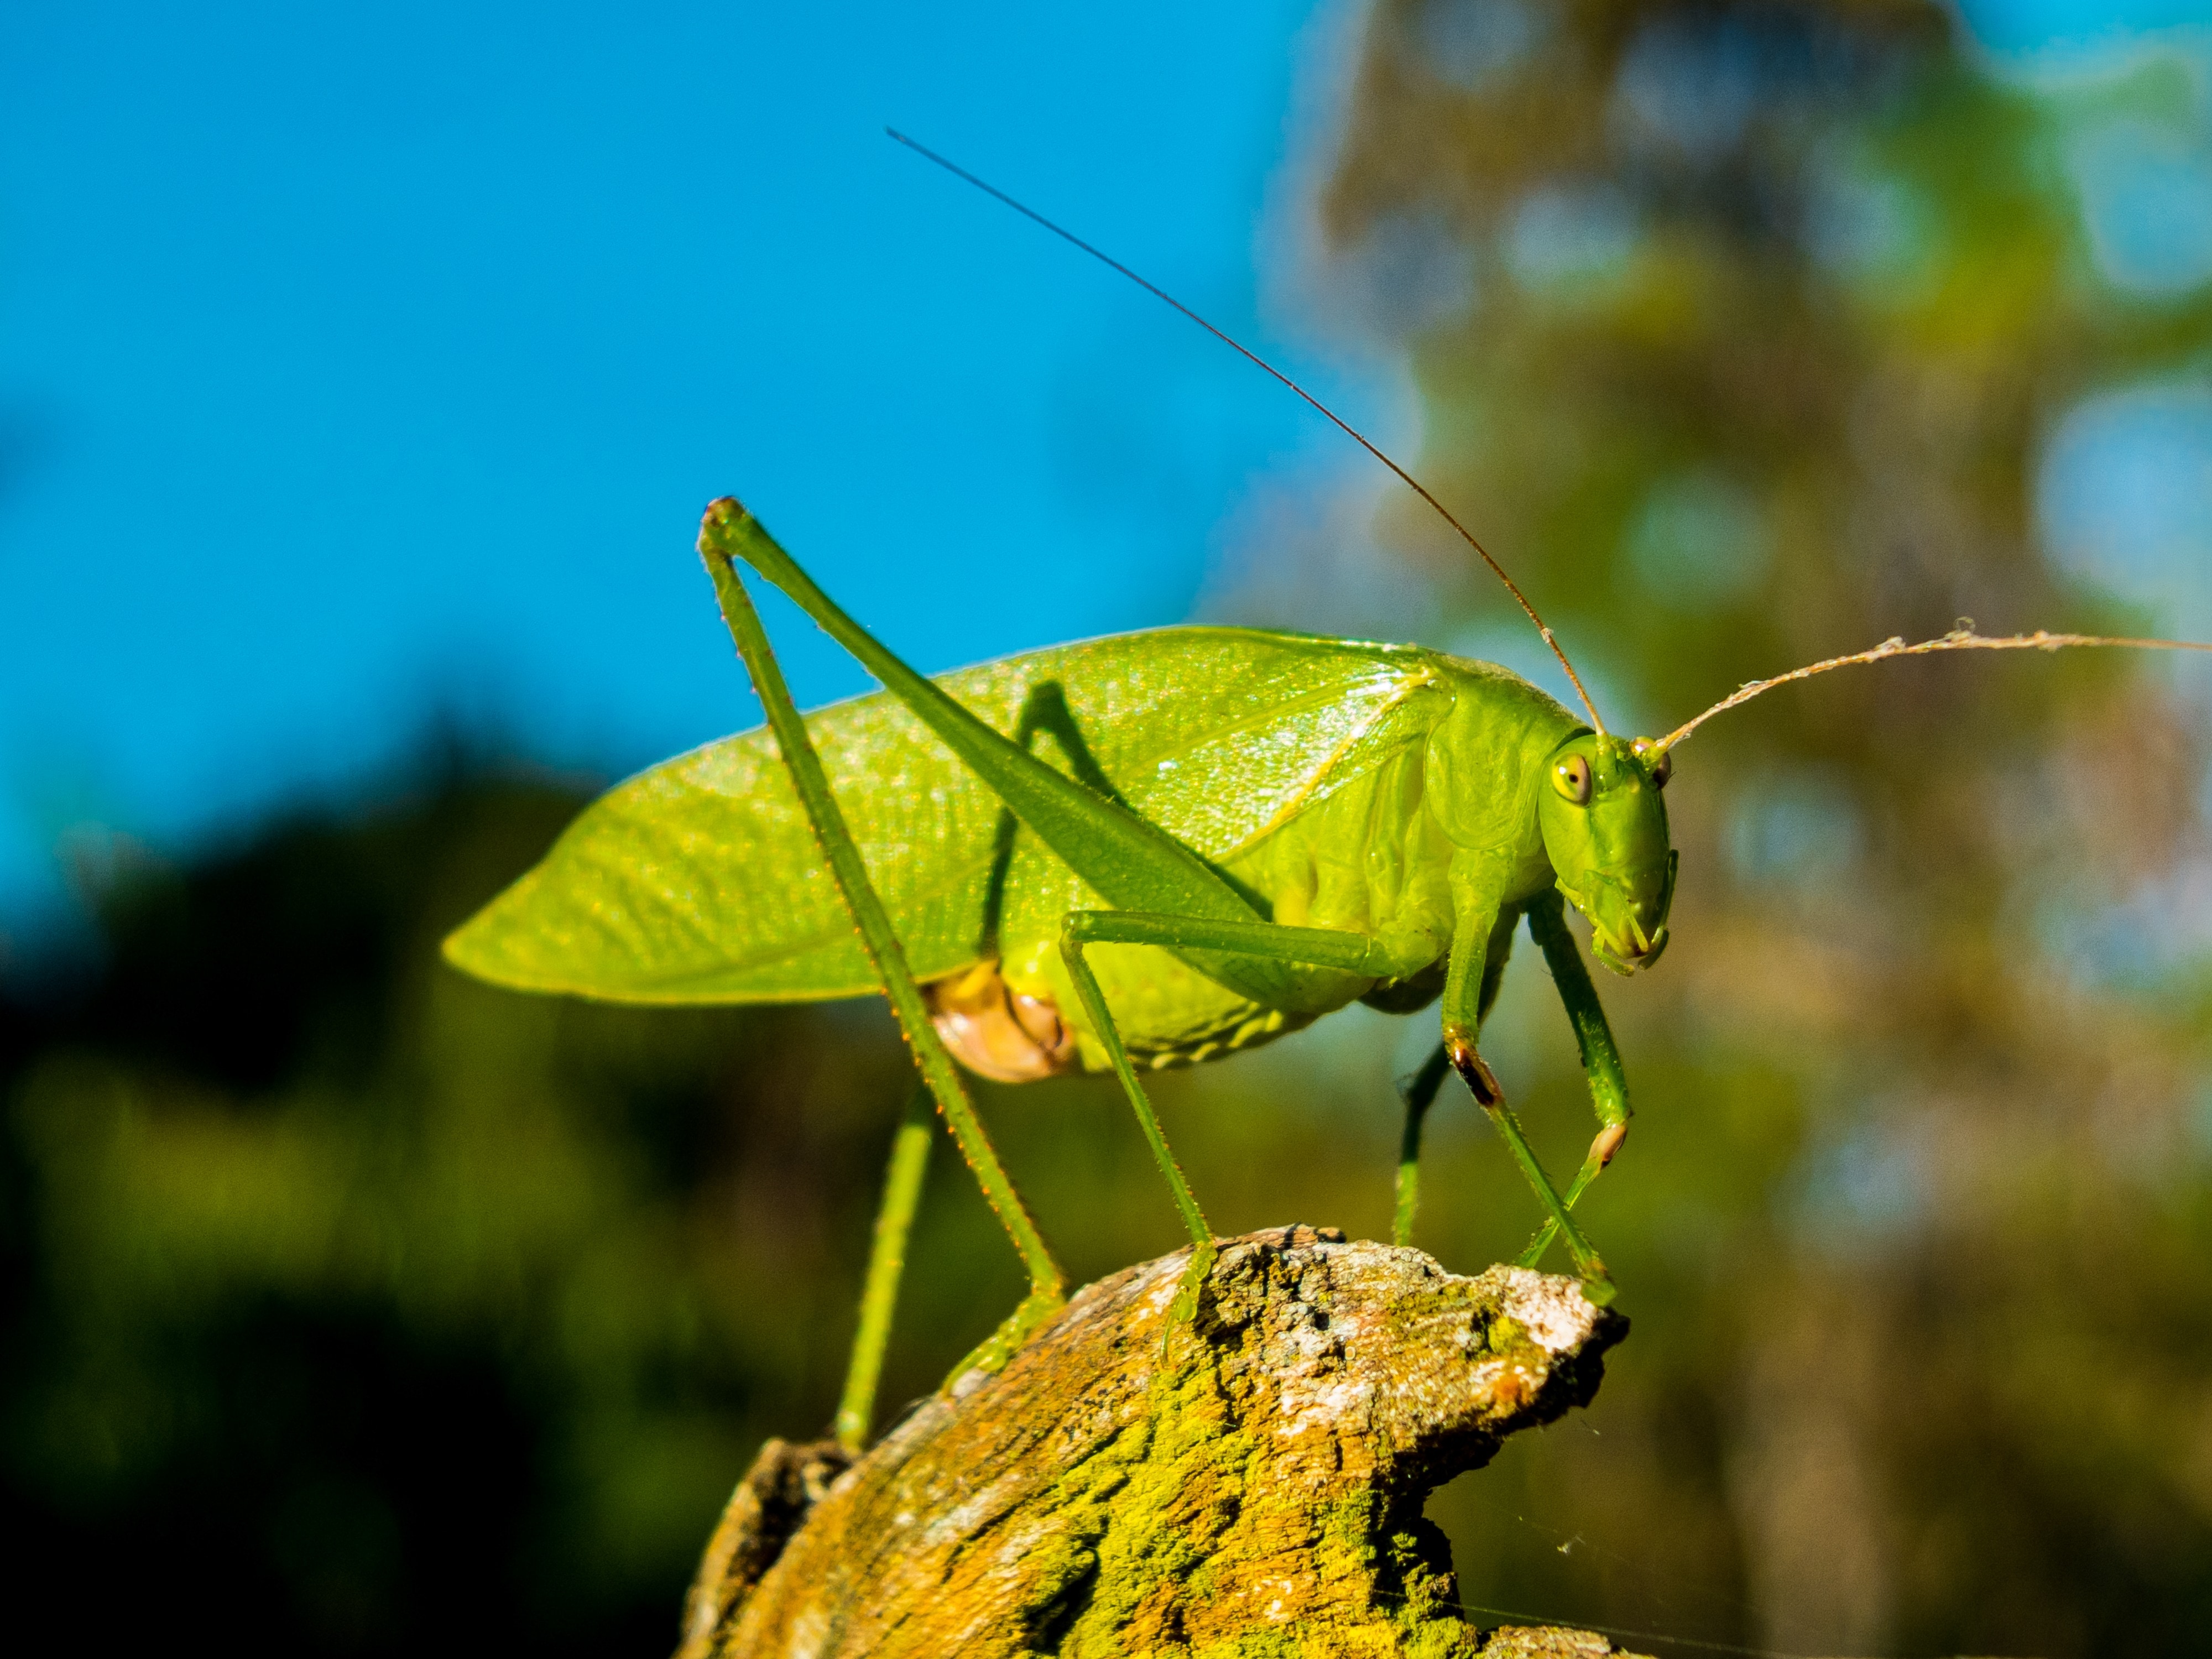 Close, Insect, Grasshopper, Green, insect, focus on foreground